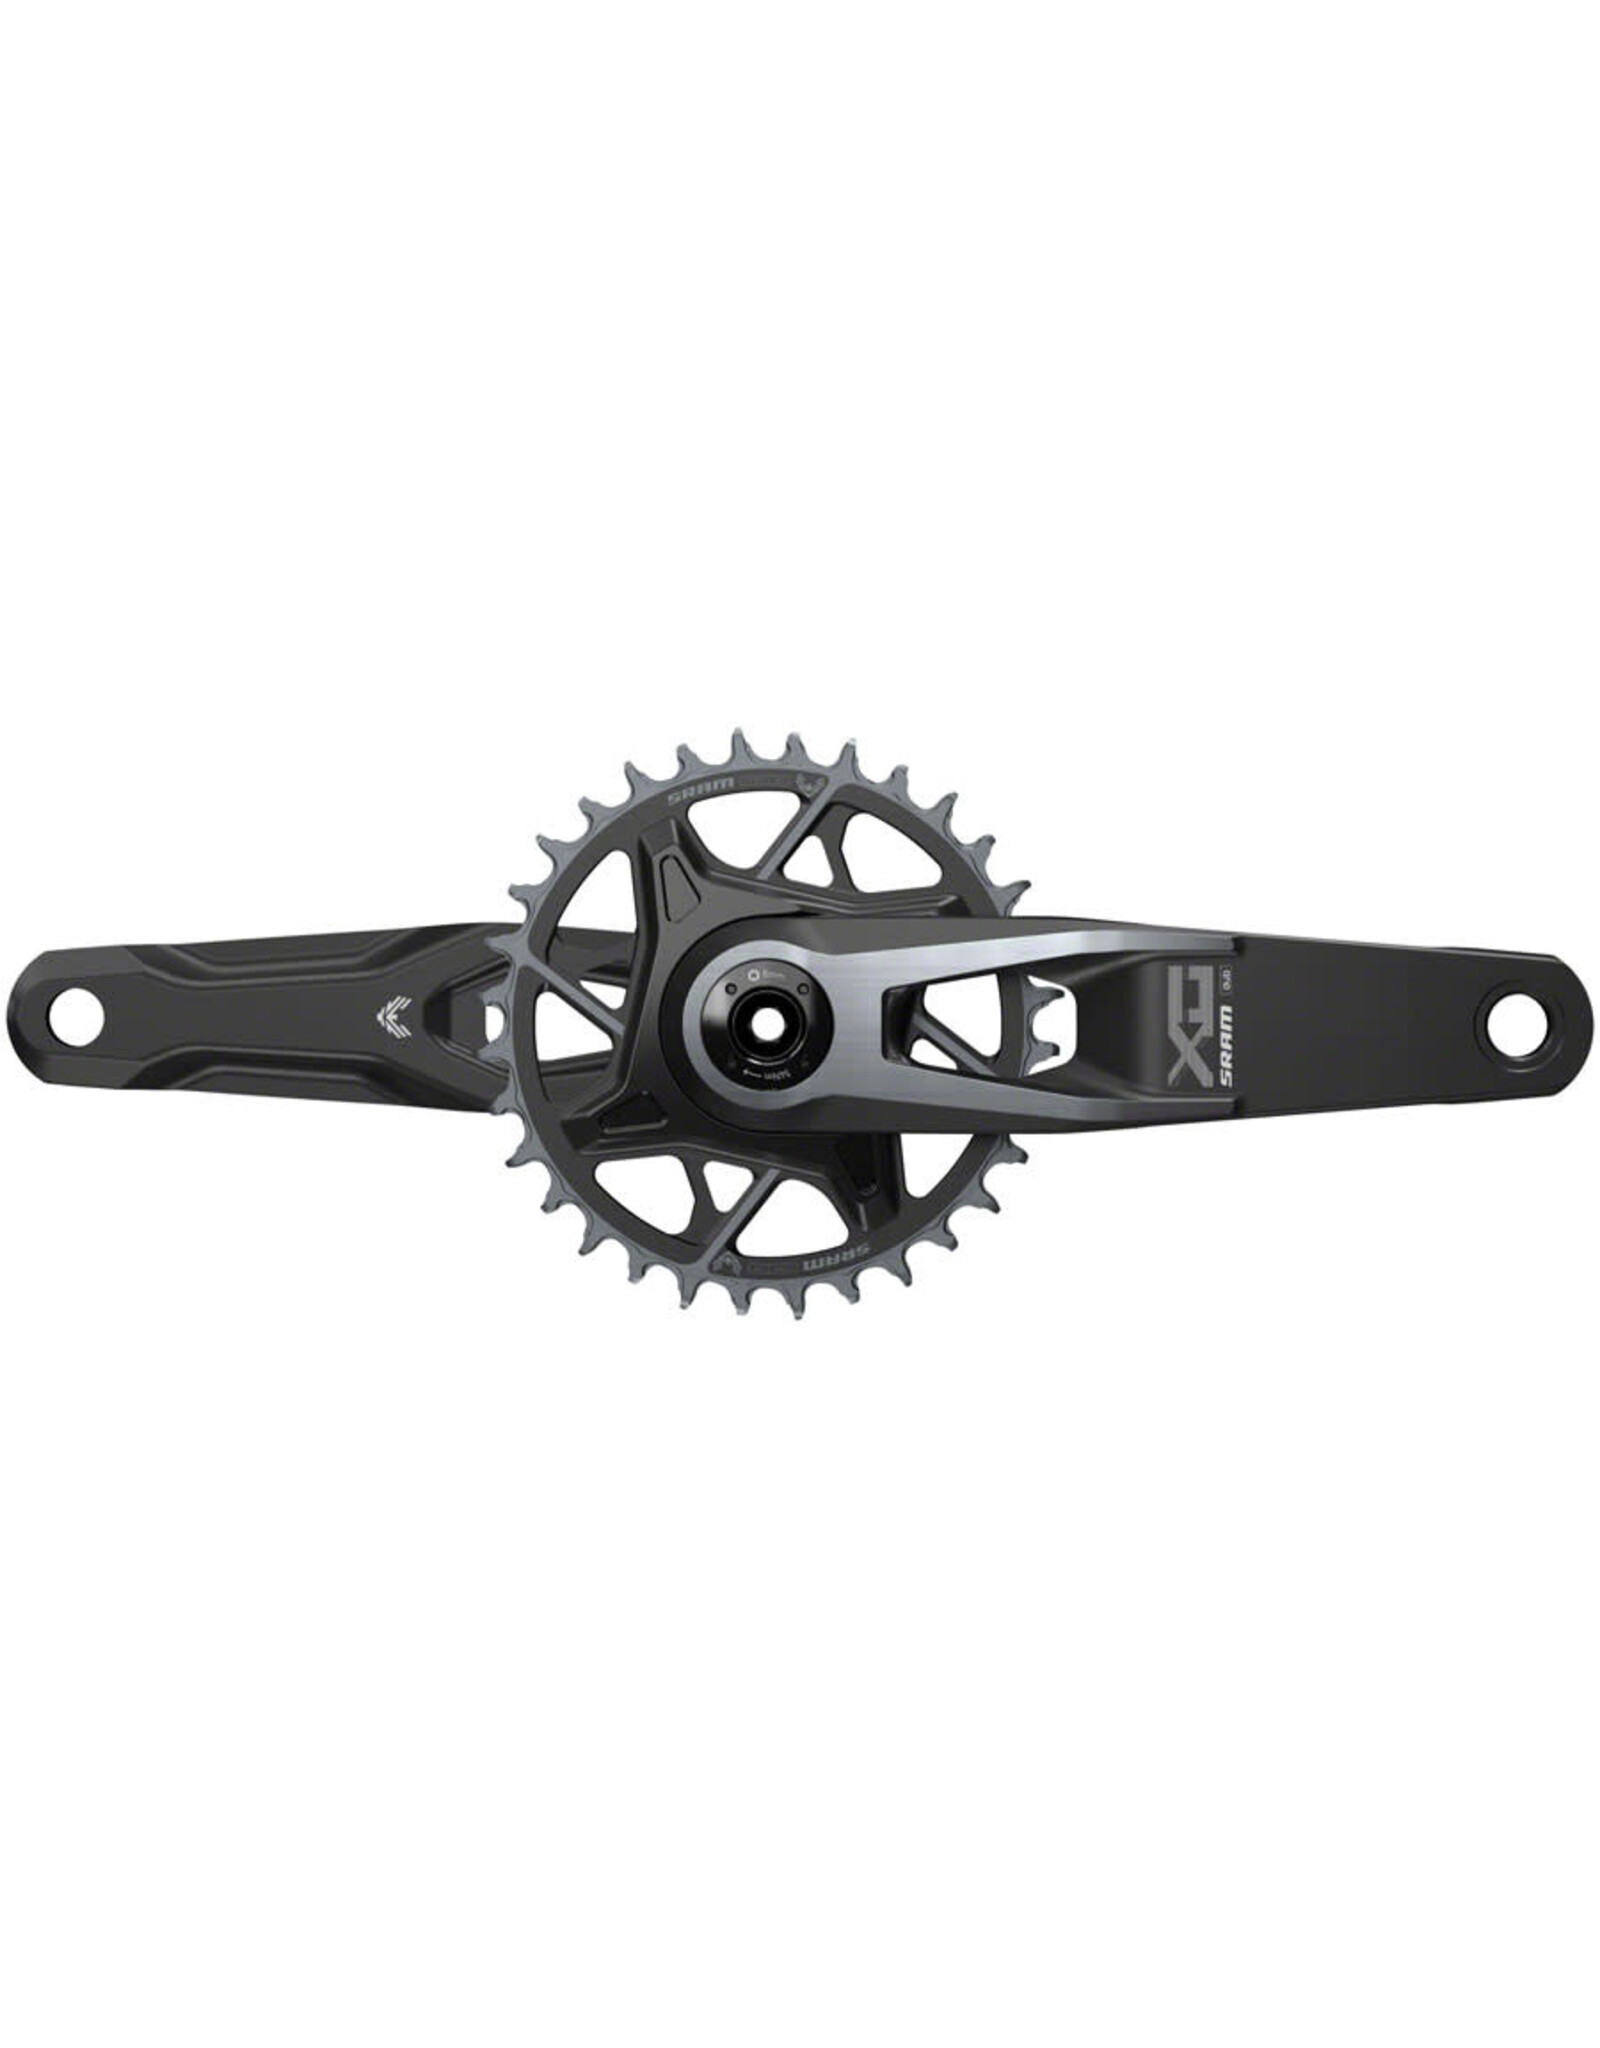 SRAM SRAM X0 Eagle T-Type Wide Crankset - 165mm, 12-Speed, 32t Chainring, Direct Mount, 2-Guards, DUB Spindle Interface, Black, V2